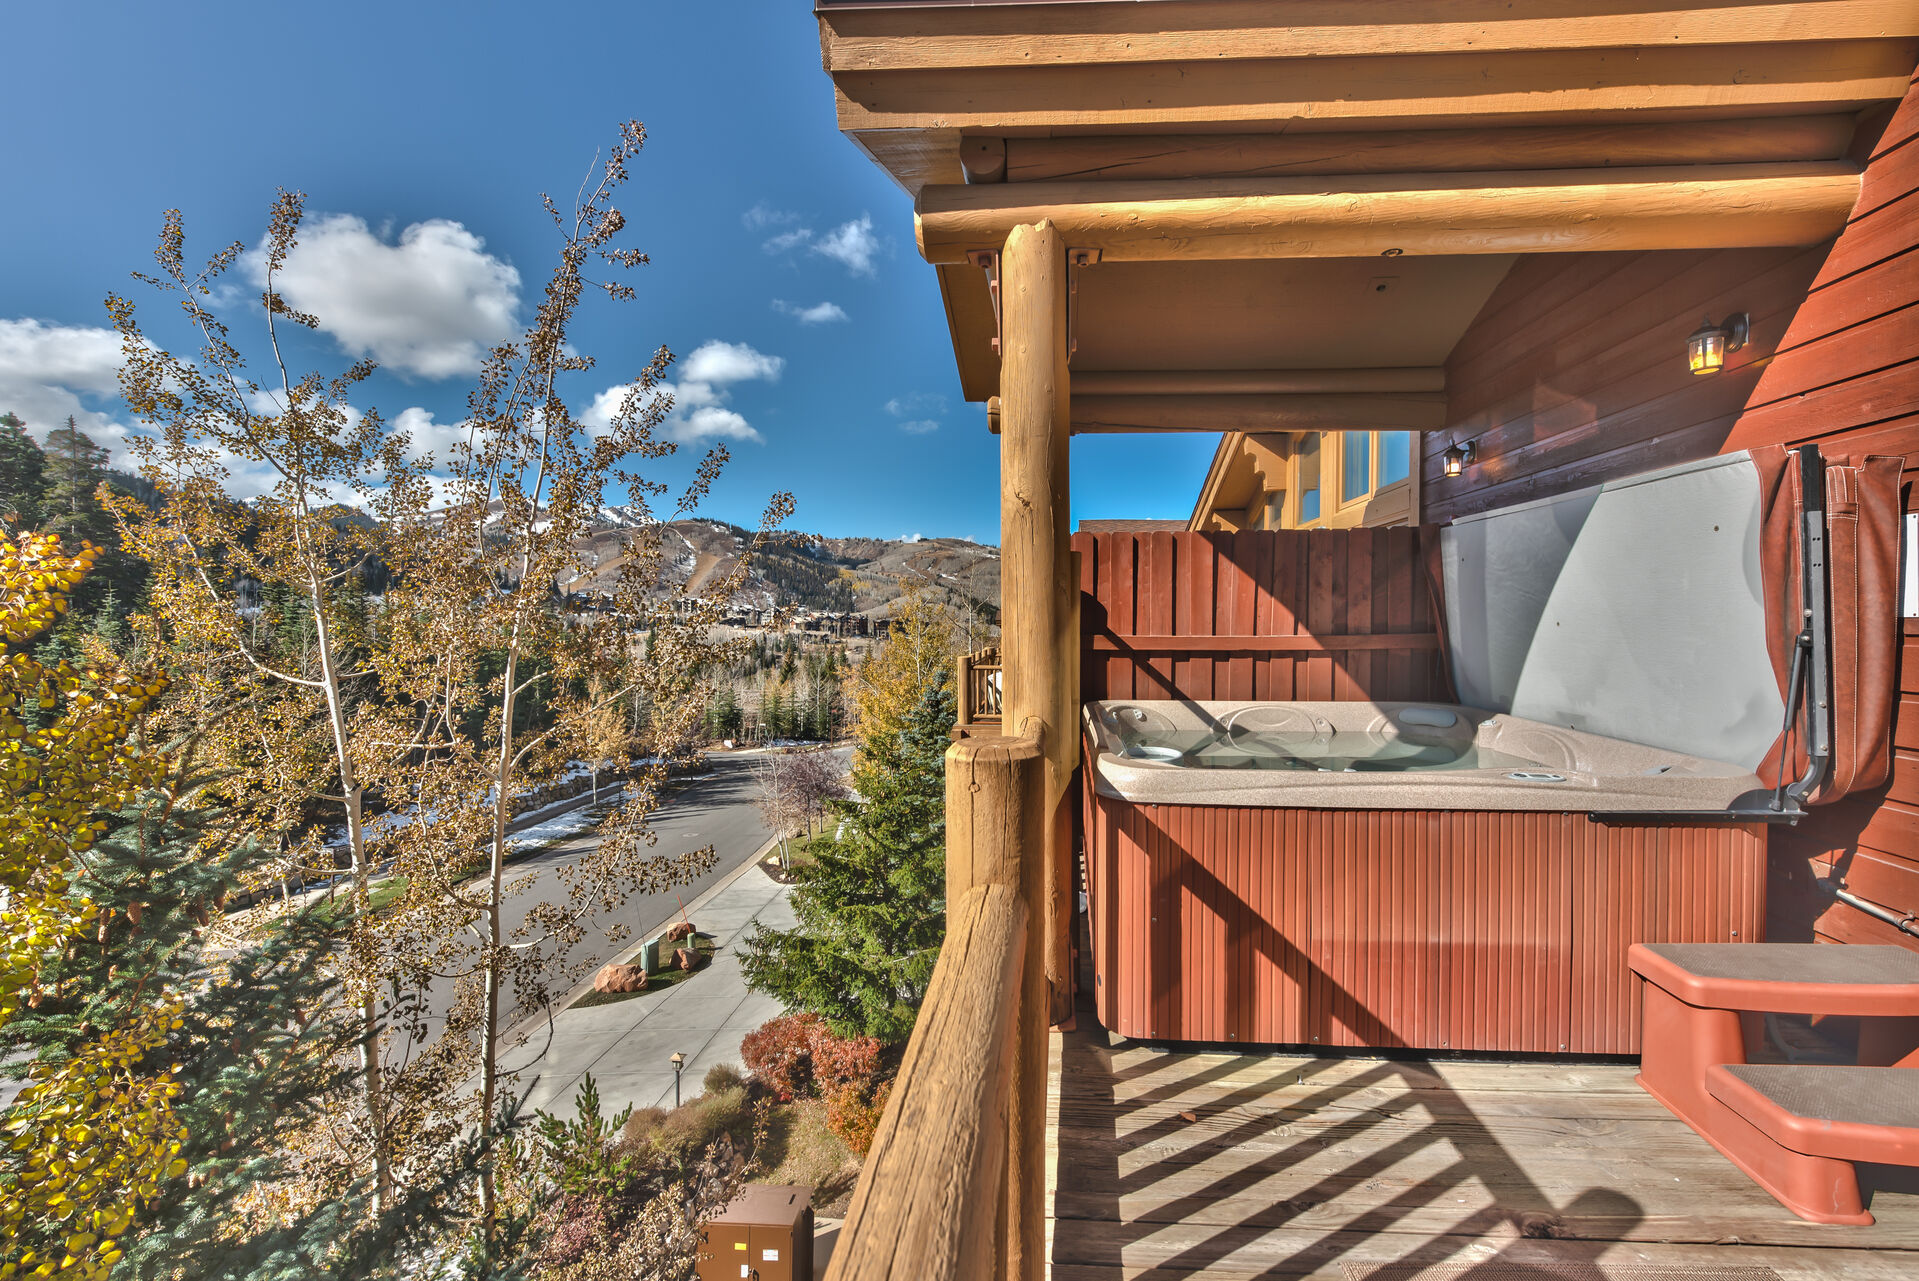 Private Deck with a Hot Tub and Great Views